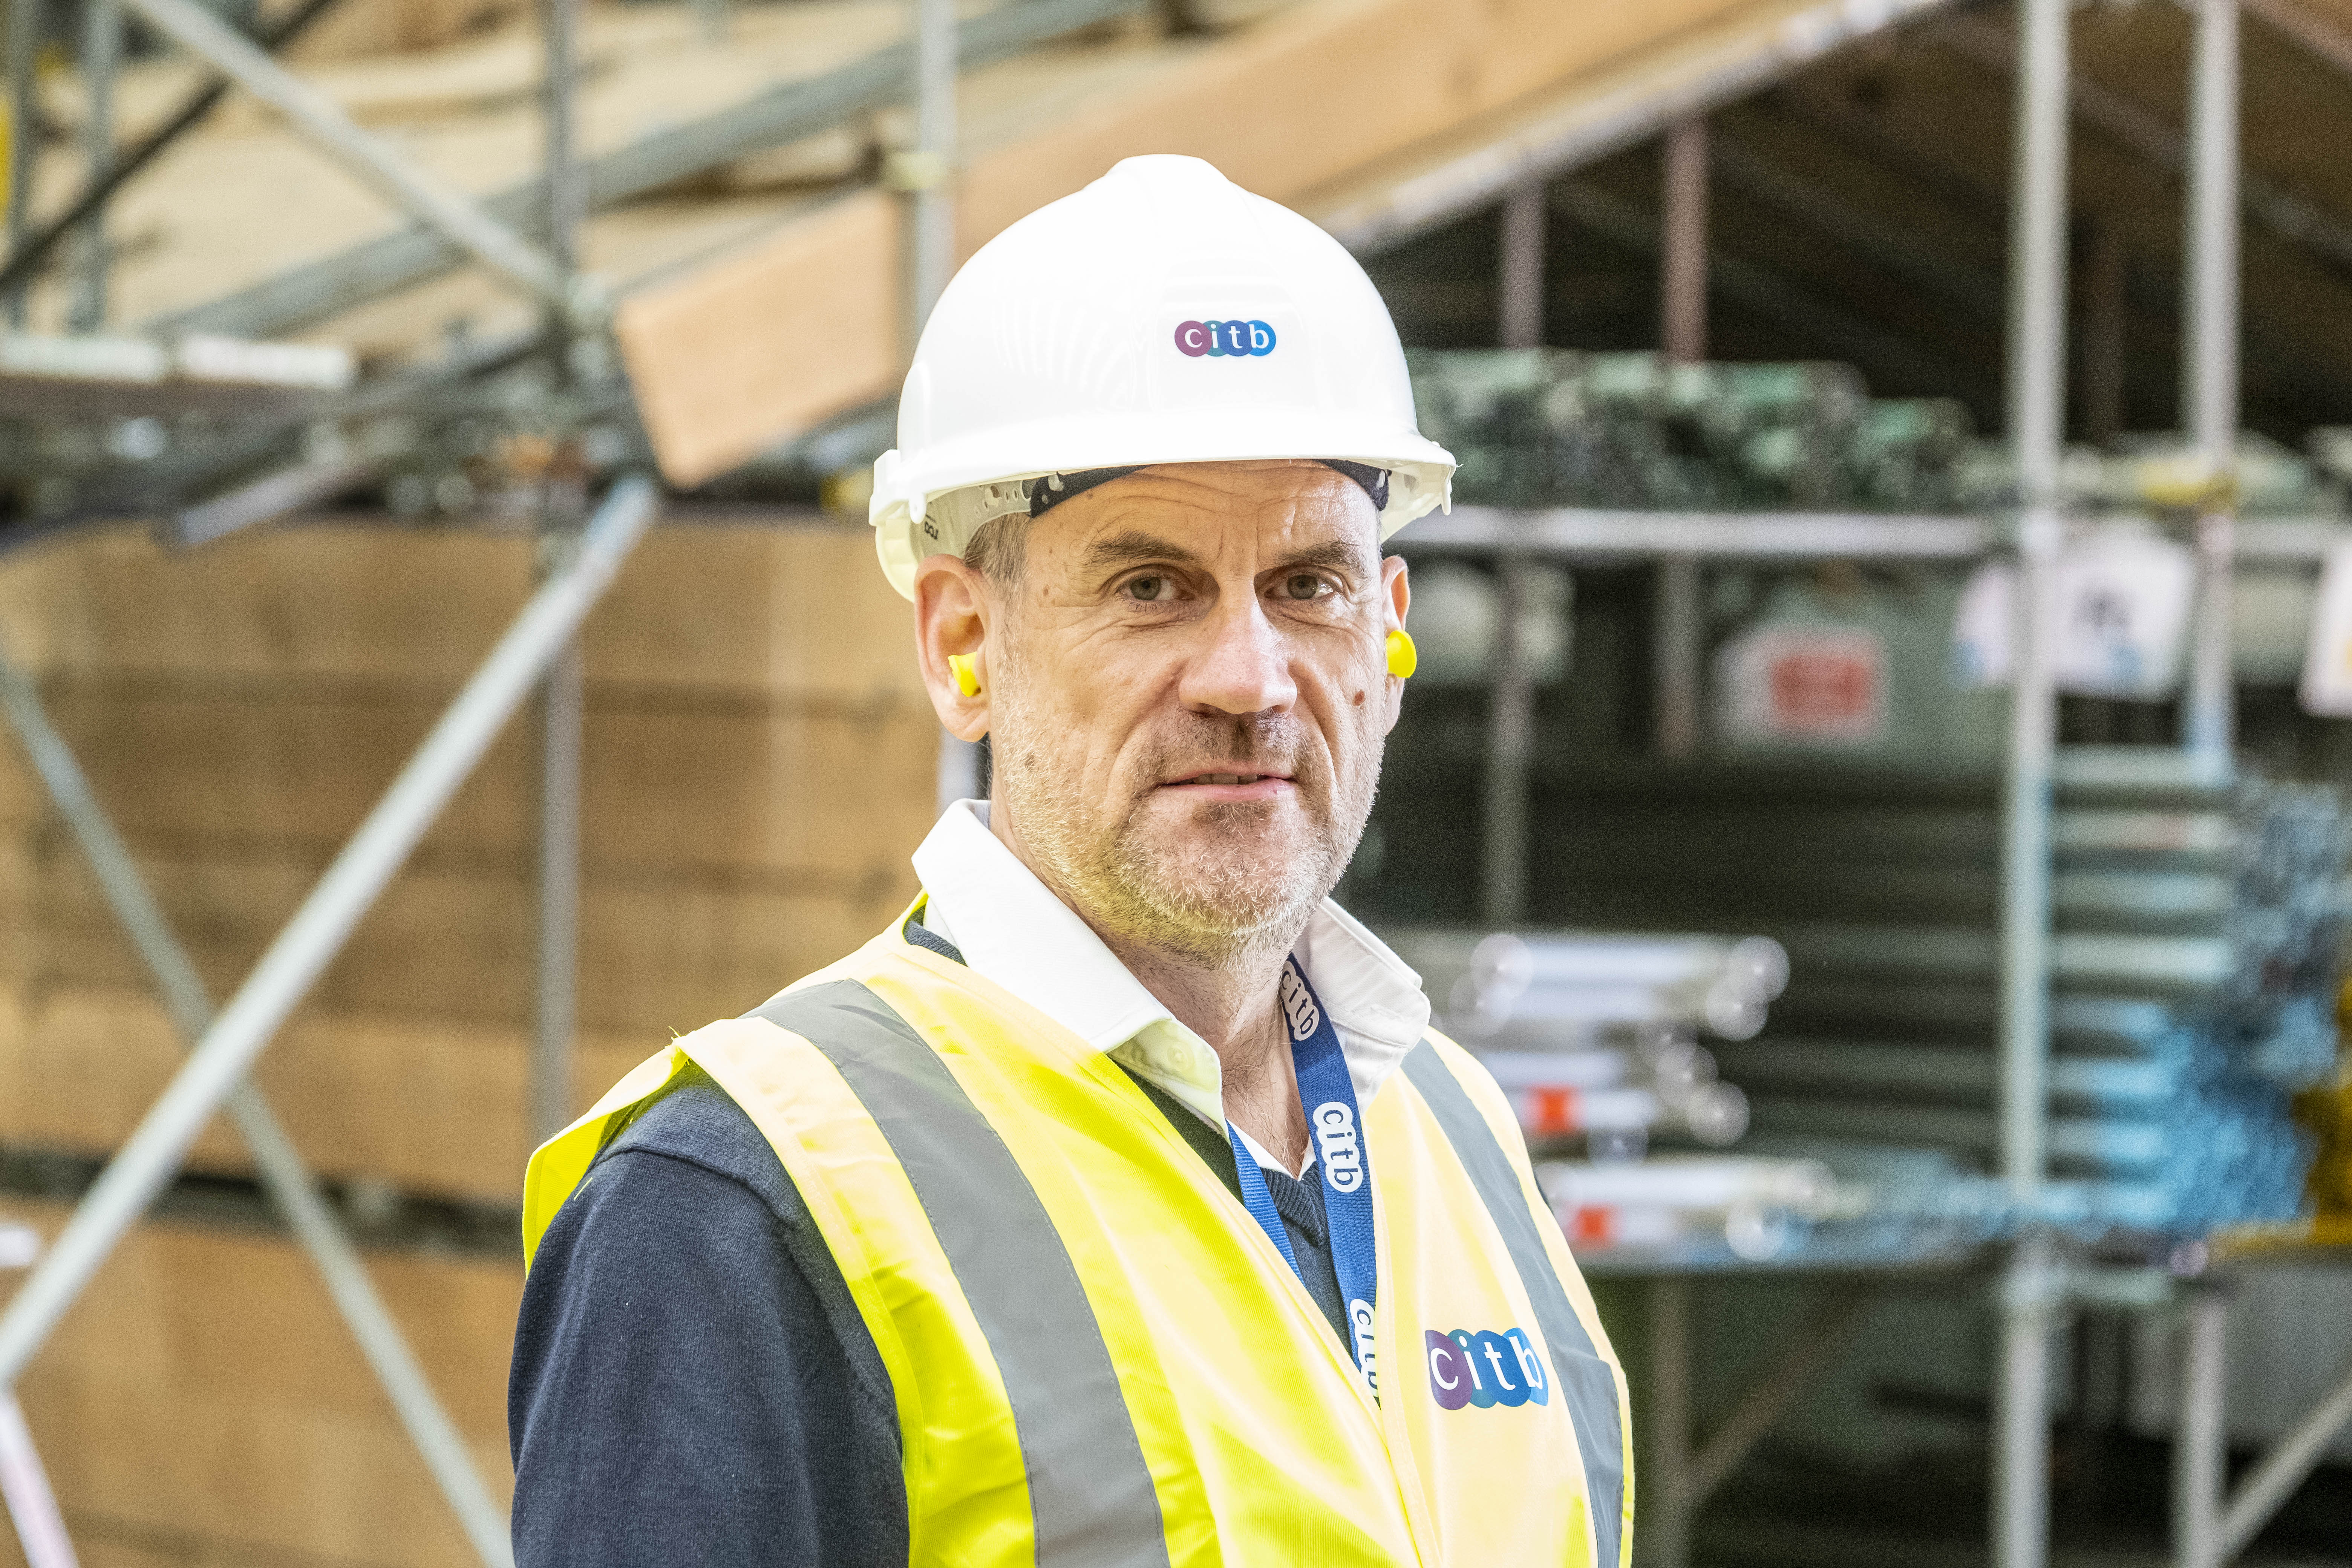 CITB chief executive full of praise for Scottish construction sector as apprenticeships numbers bounce back